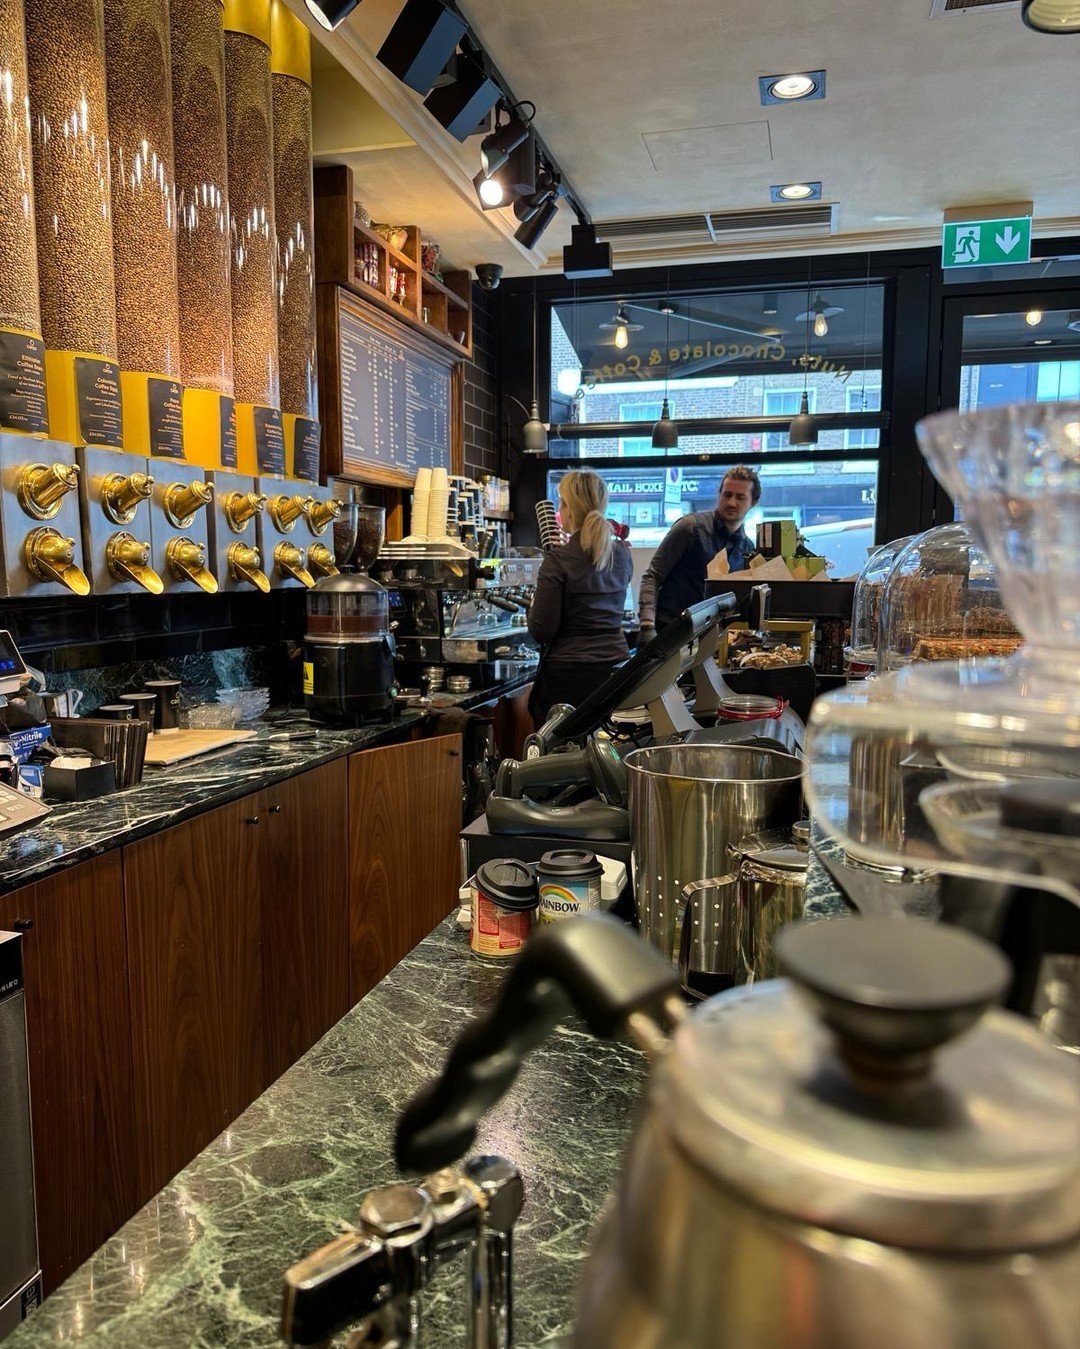 Coffee at Carpo - always a great experience.
Have you been yet?
It&rsquo;s 10 years old this year, serving fantastic coffee to the residents and workers of Knightsbridge since 2014. 
Carpo Knightsbridge was the first carpo store to offer a lounge and